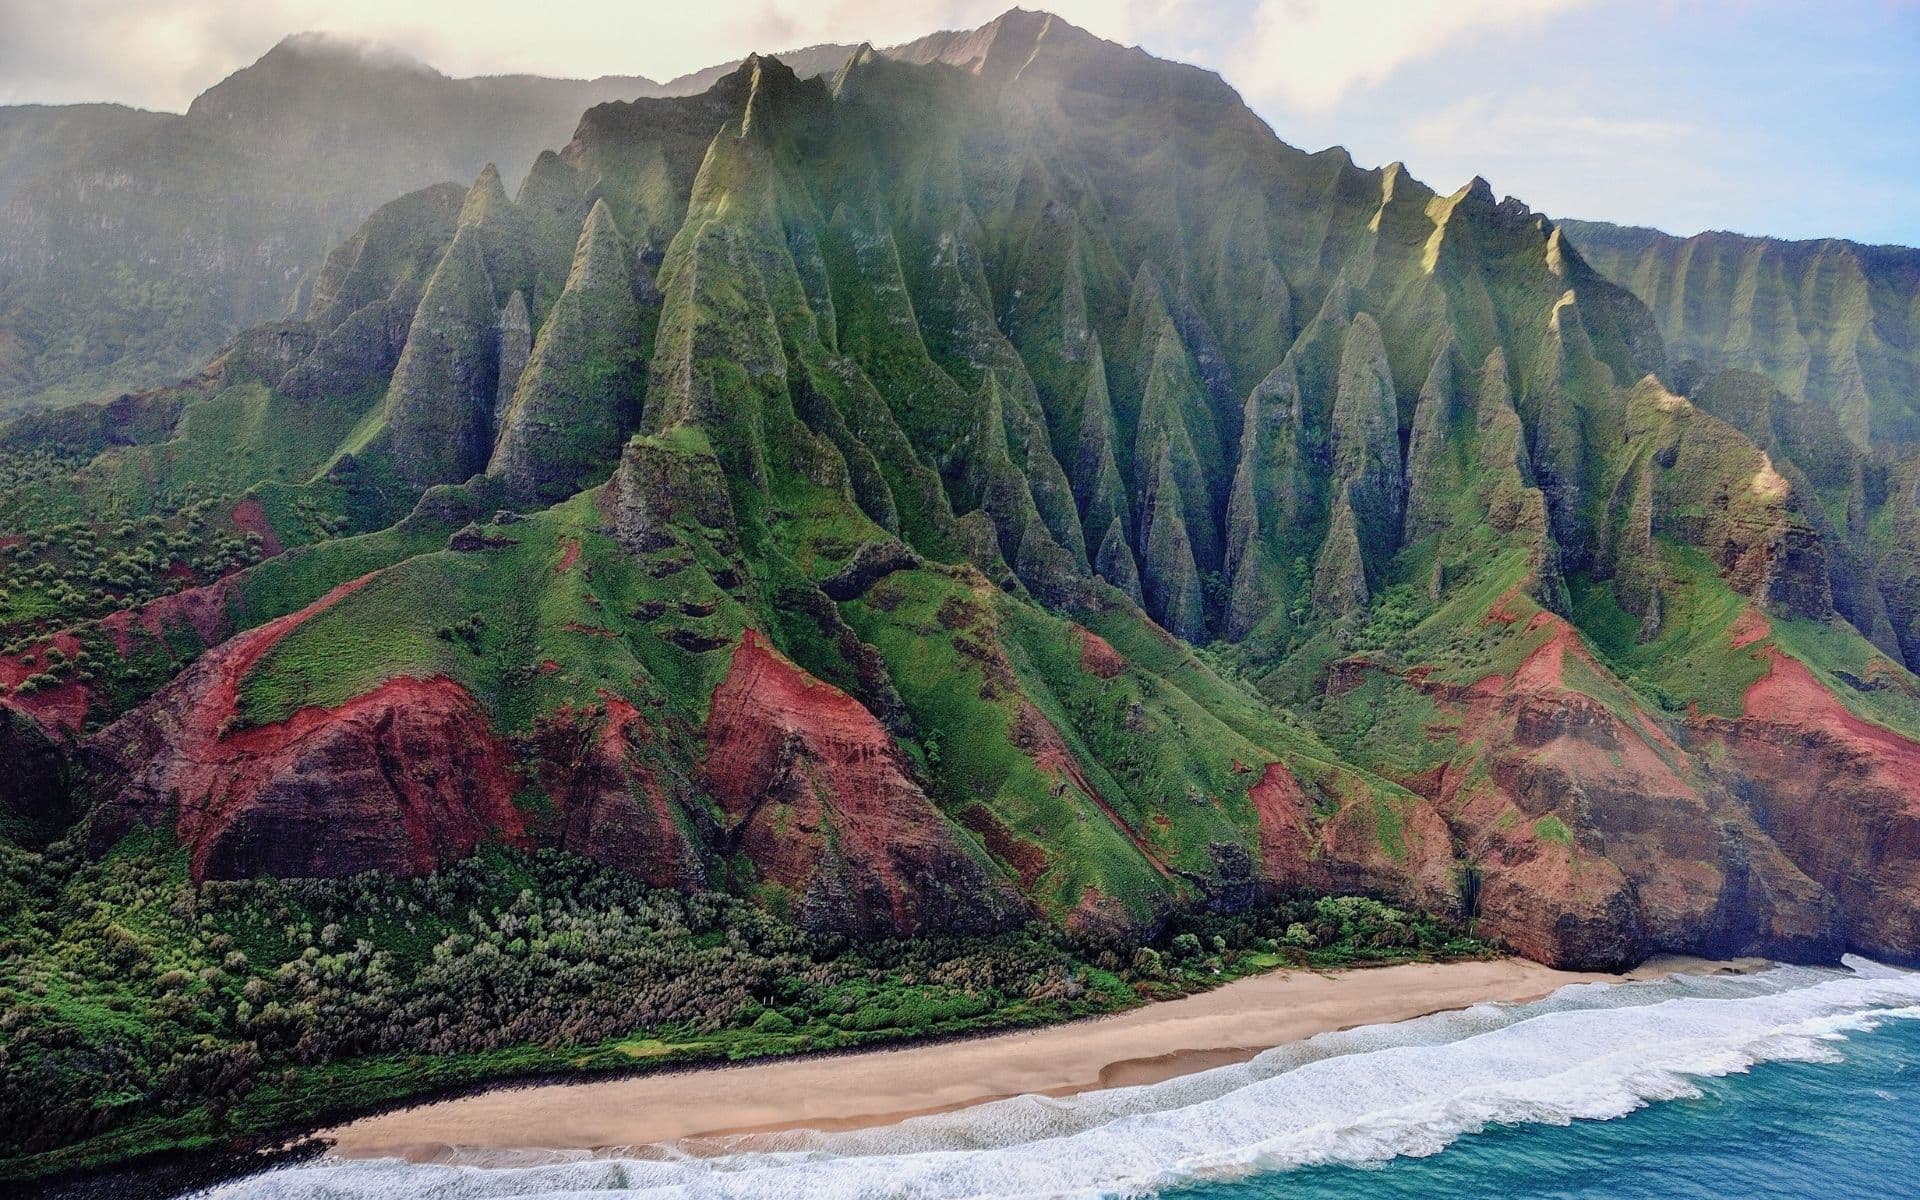 Coastline of Hawaii with mountains in the background and crystal blue waves hitting the beach